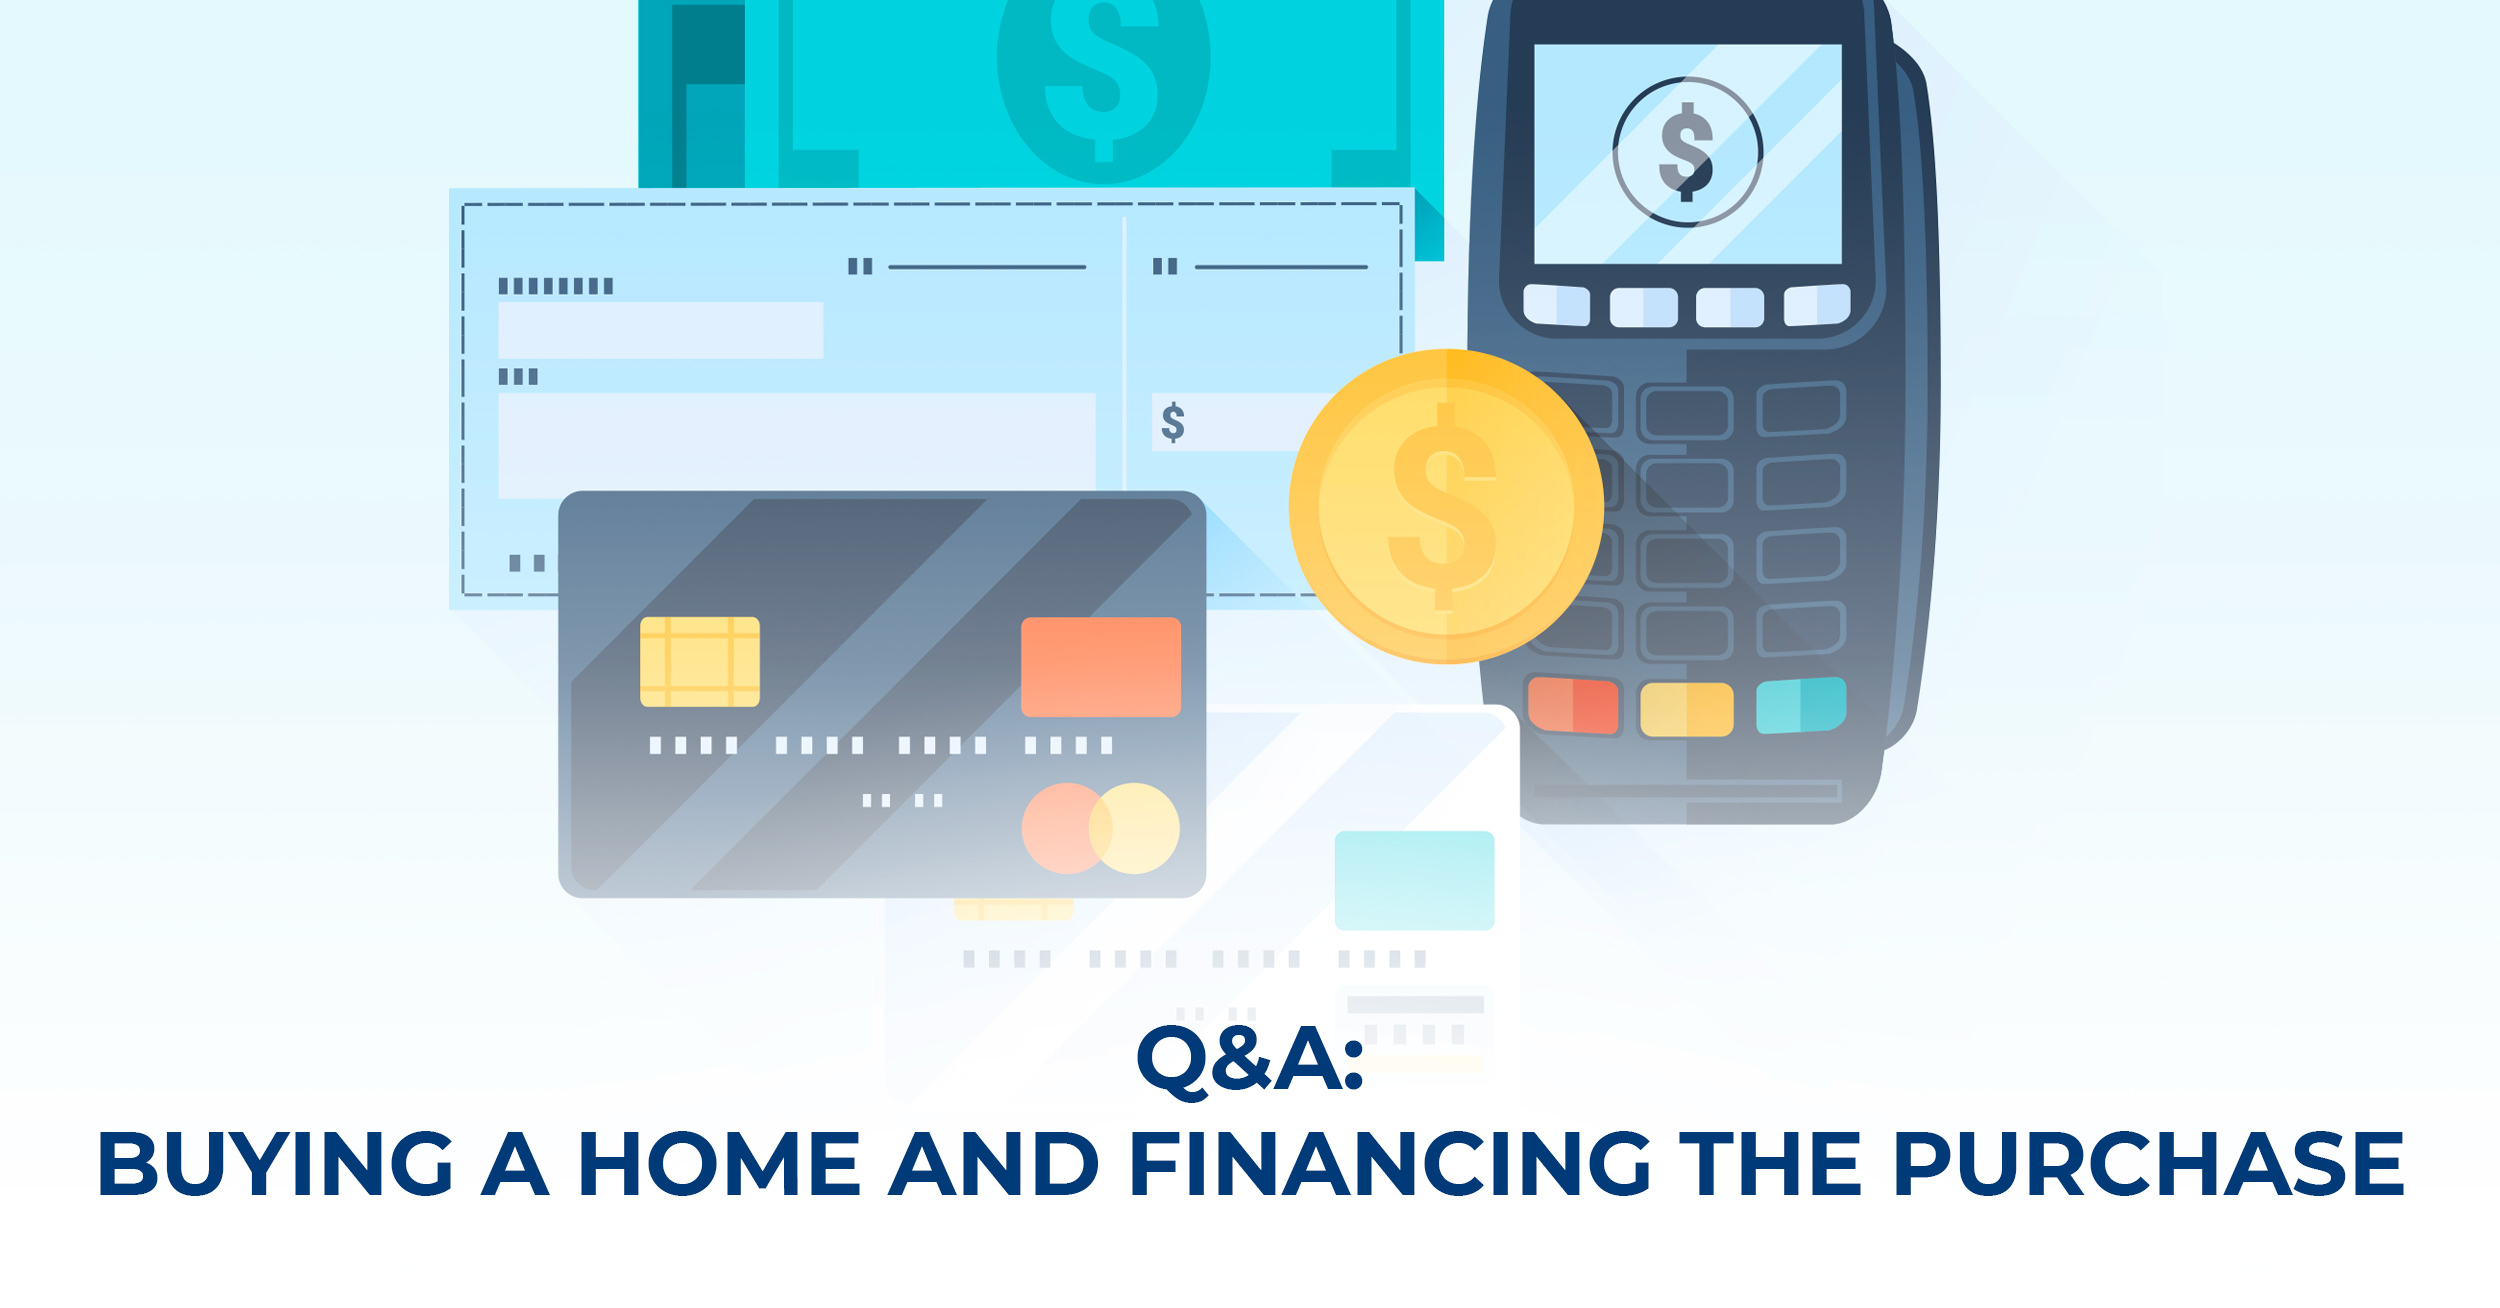 7 Questions and Answers For Buying a Home and Financing the Purchase